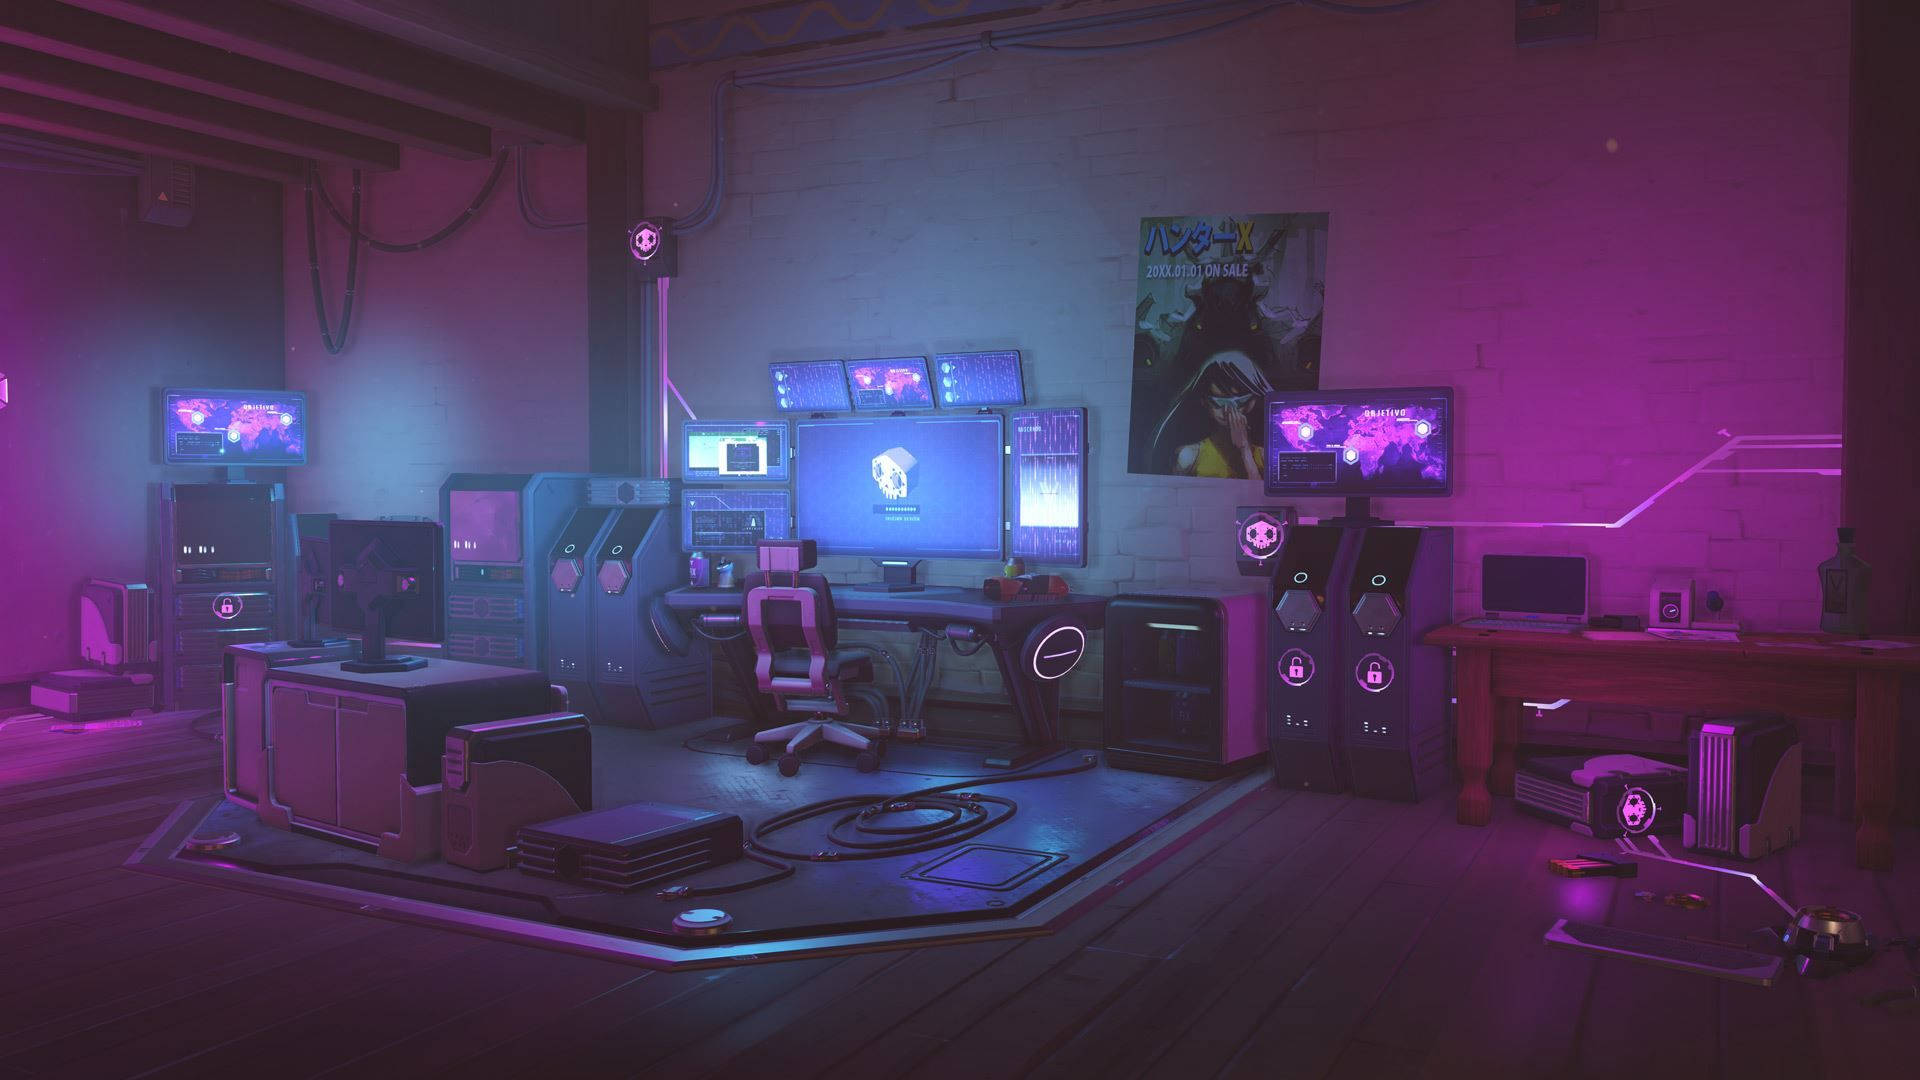 The Dream Gaming Room